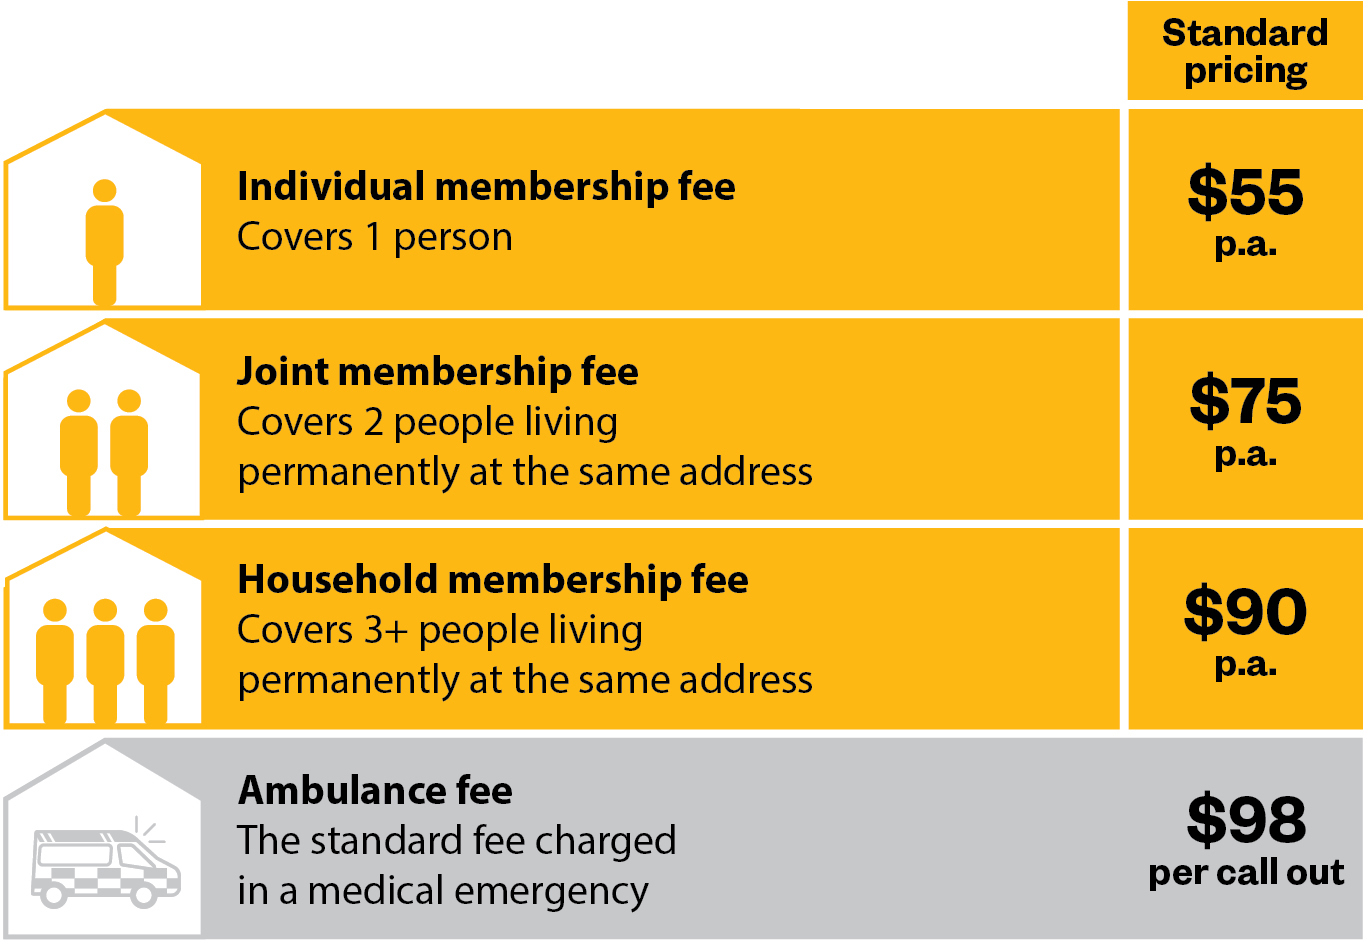 An Individual Membership fee is $55 p.a. and covers 1 person. A Joint Membership fee is $75 p.a. and covers 2 people living permanently at the same address. A Household Membership fee is $90 p.a. and covers 3+ people living permanently at the same address. The standard ambulance fee charged in a medical emergency is $98 per call out.